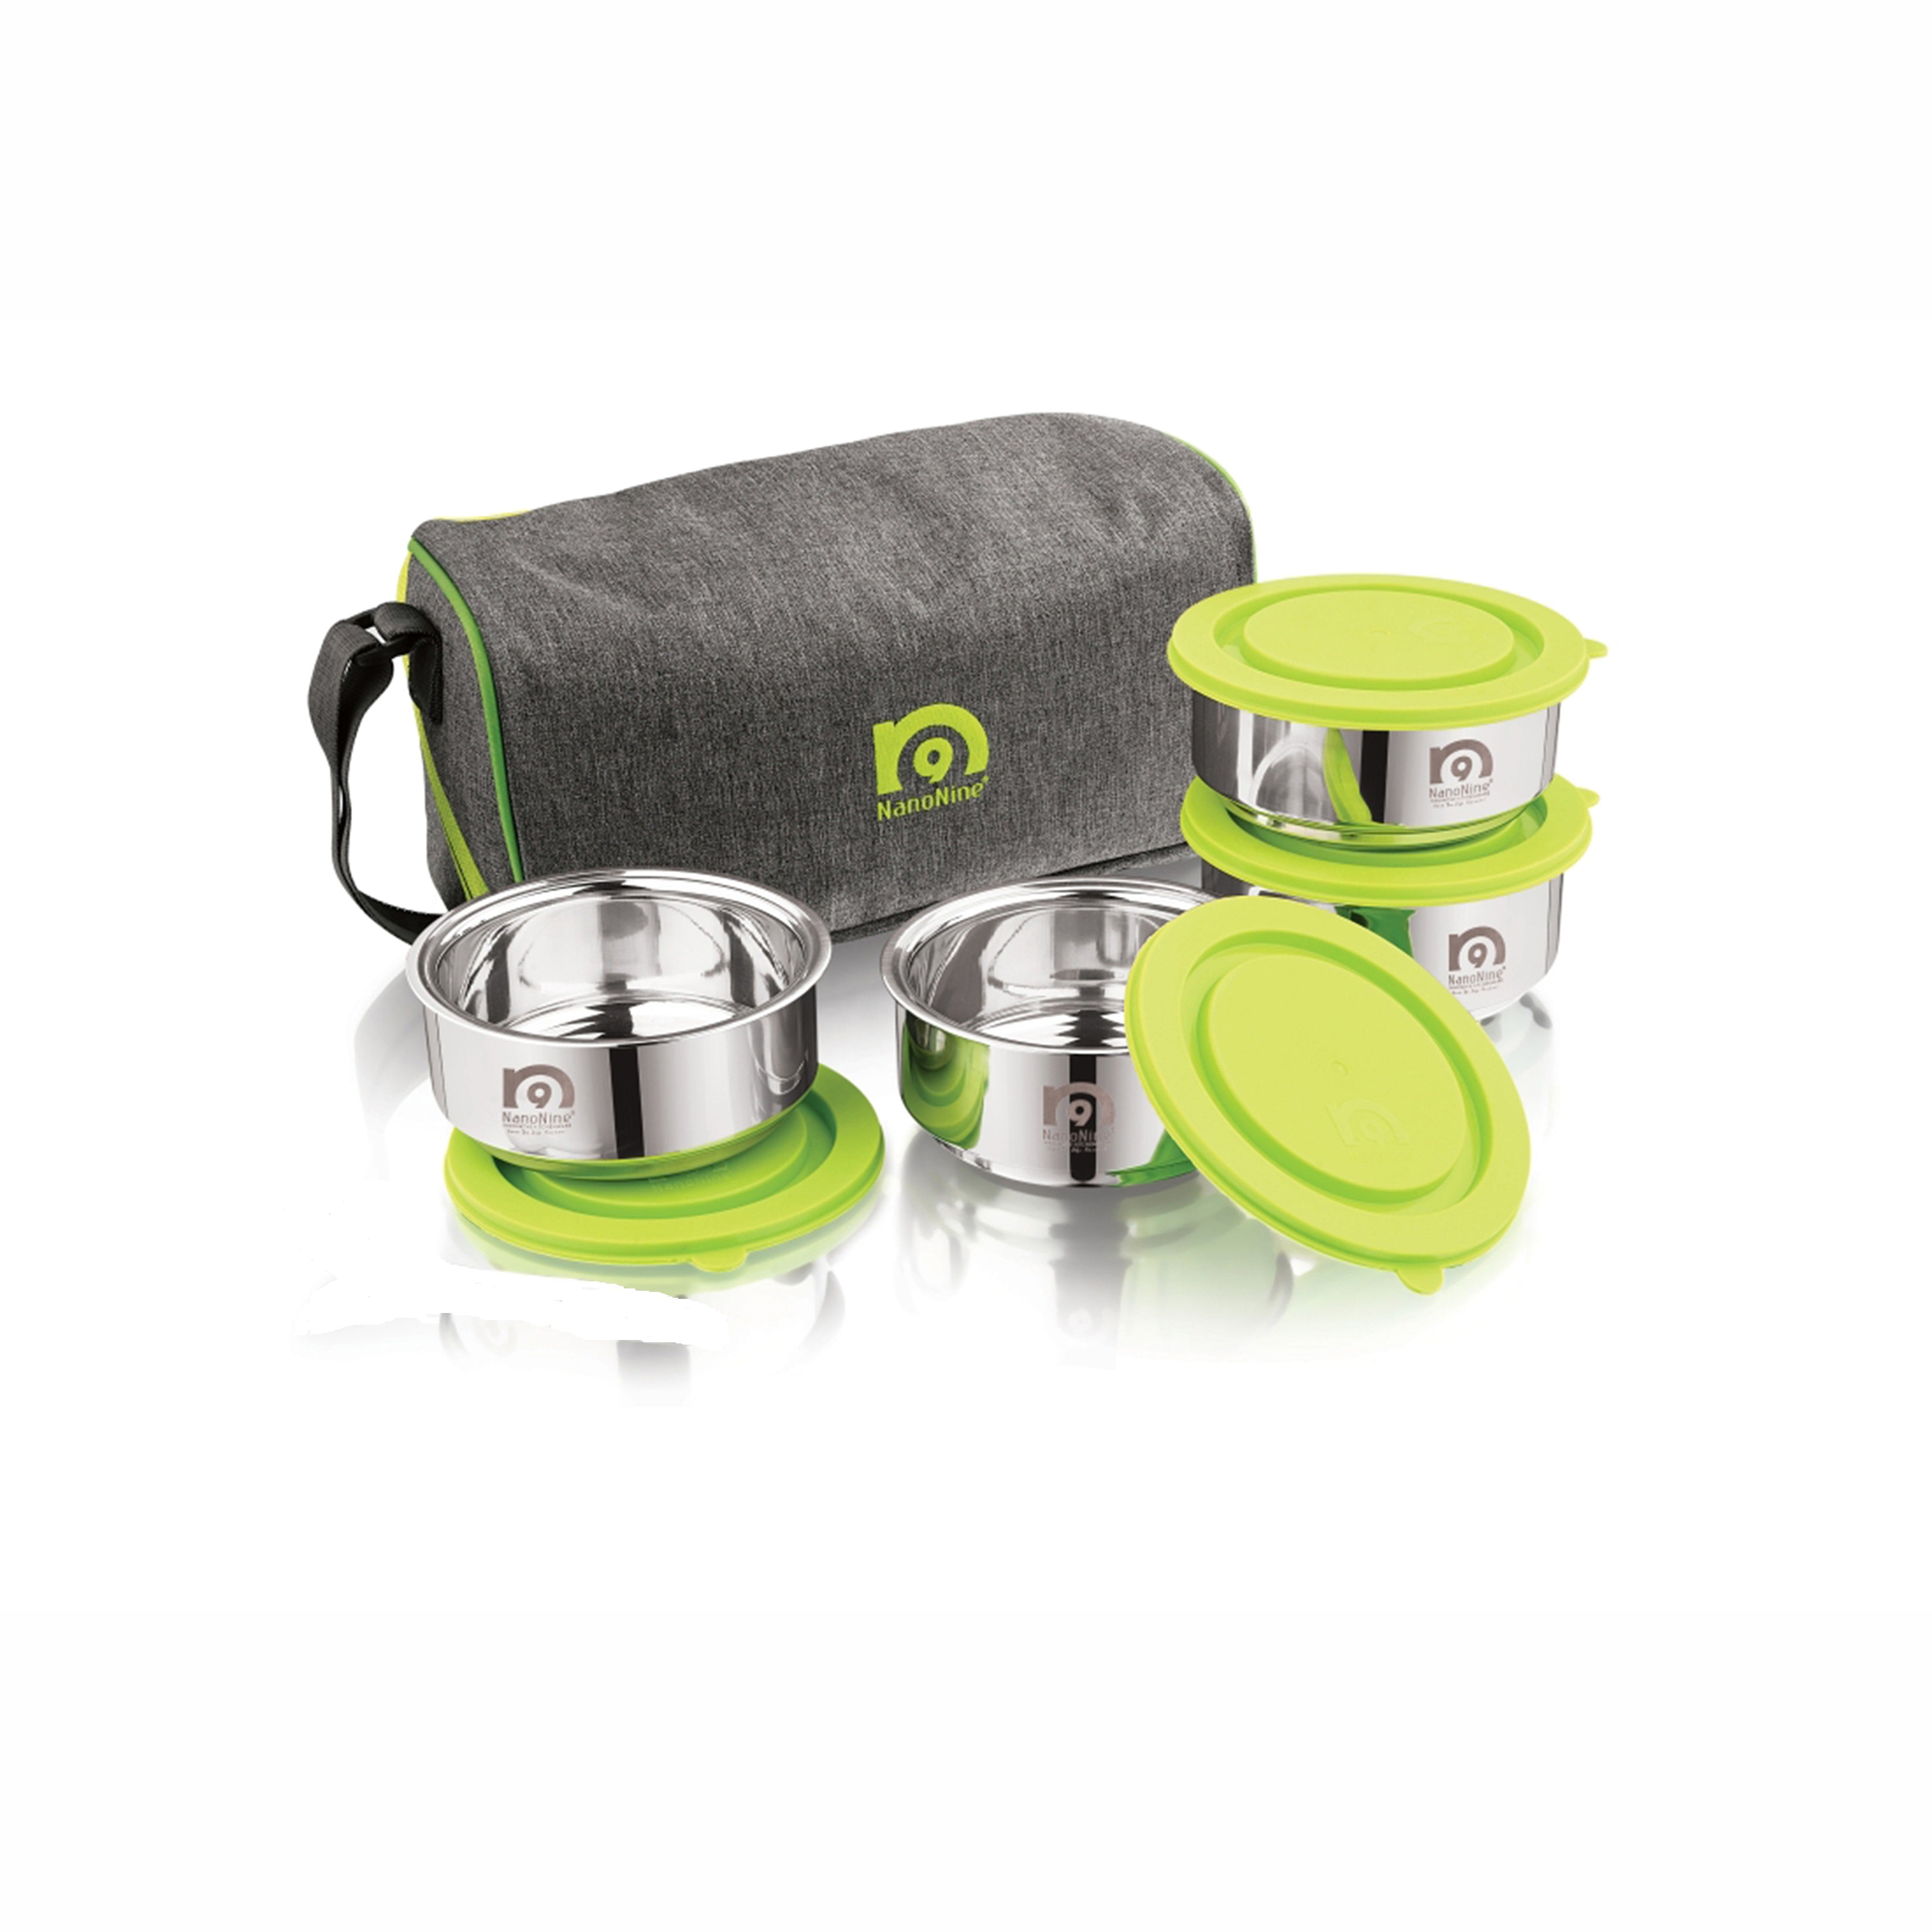 NanoNine Tiffiny Small Pro 375 ml X 4 Double Wall Insulated Stainless Steel Lunch Box.